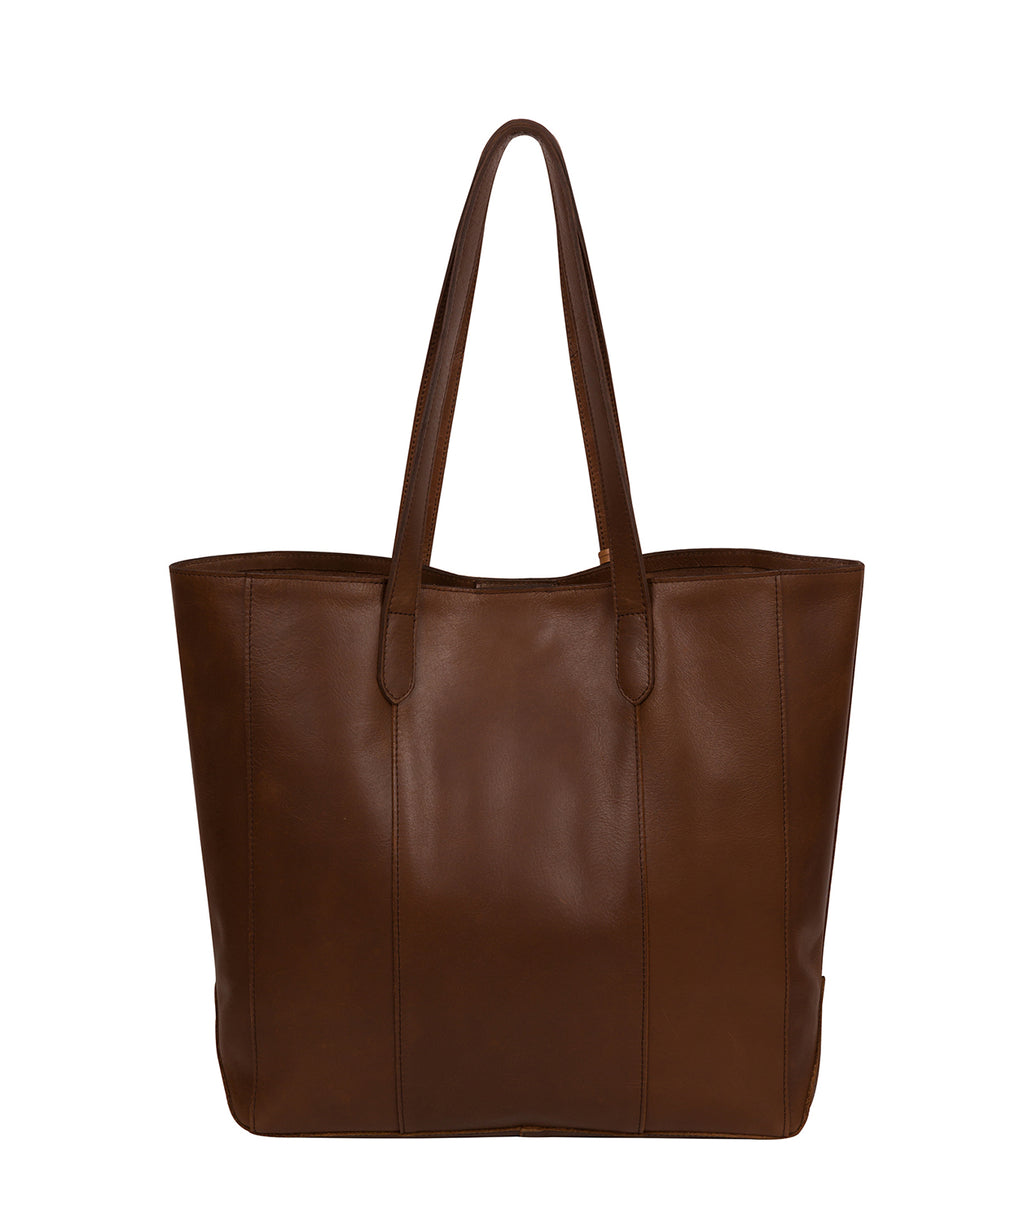 Chestnut Leather Tote Bag 'Hardy' by Conkca London – Pure Luxuries London